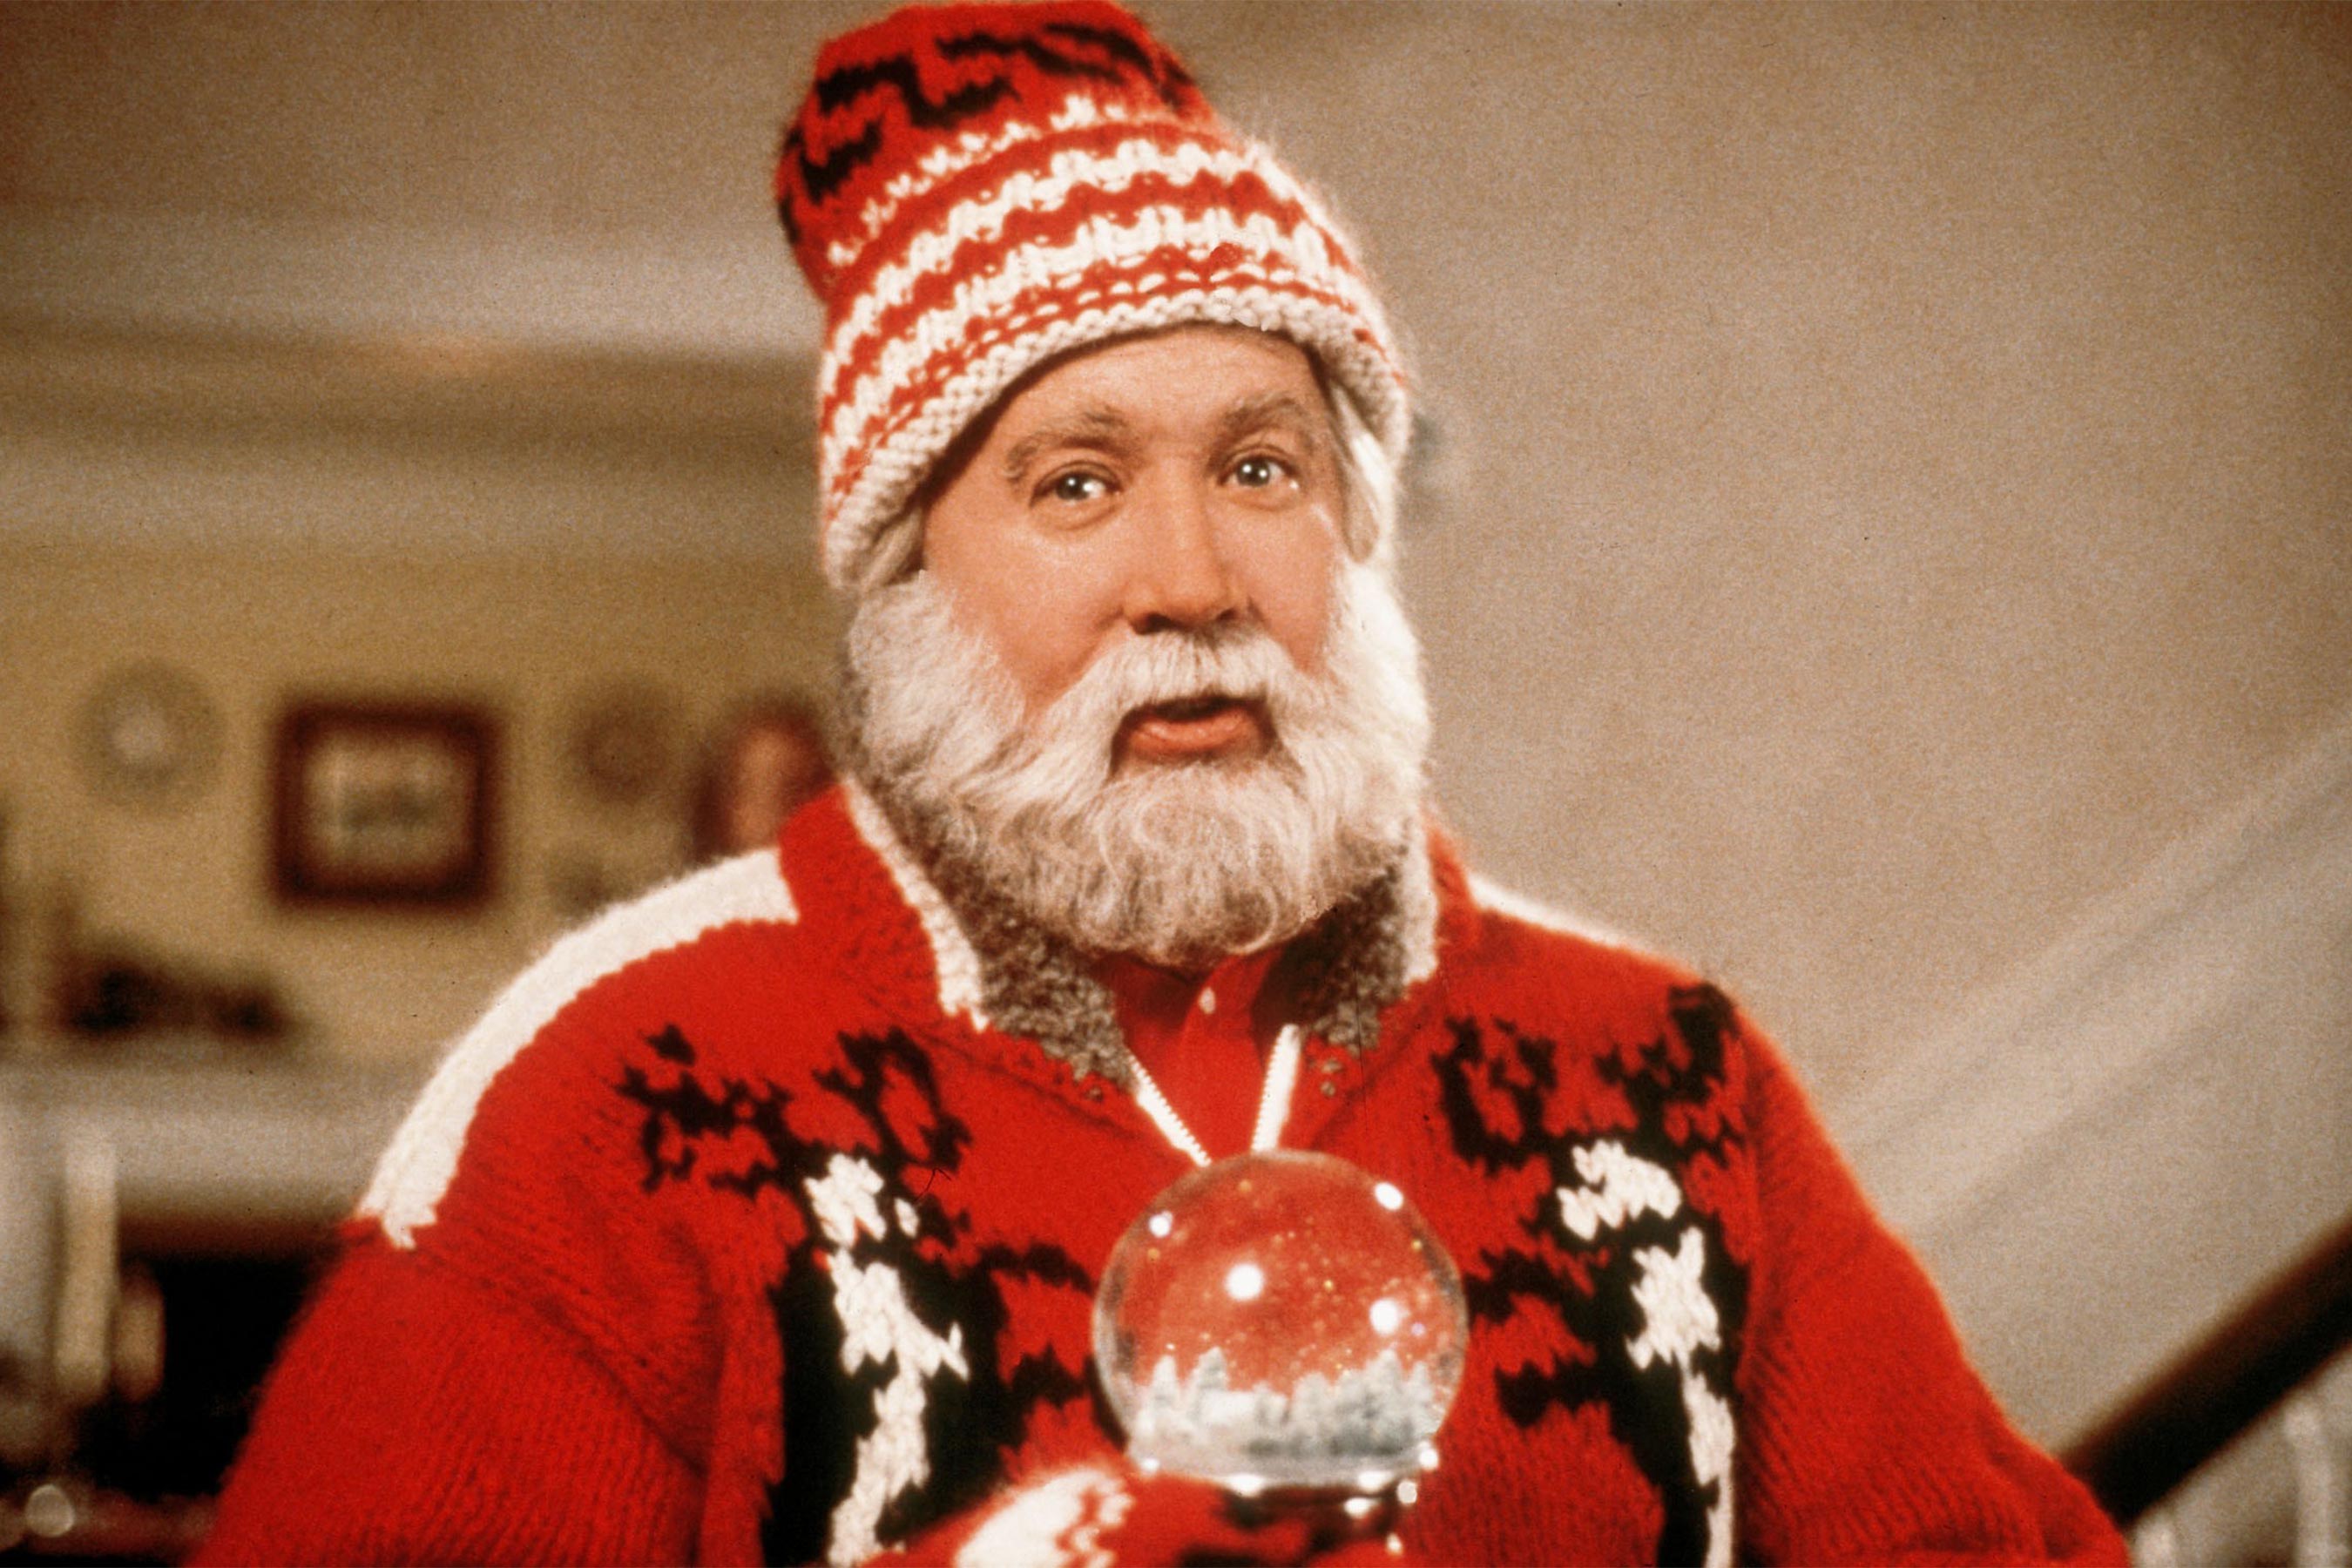 What The Cast Of The Santa Clause Looks Like Today